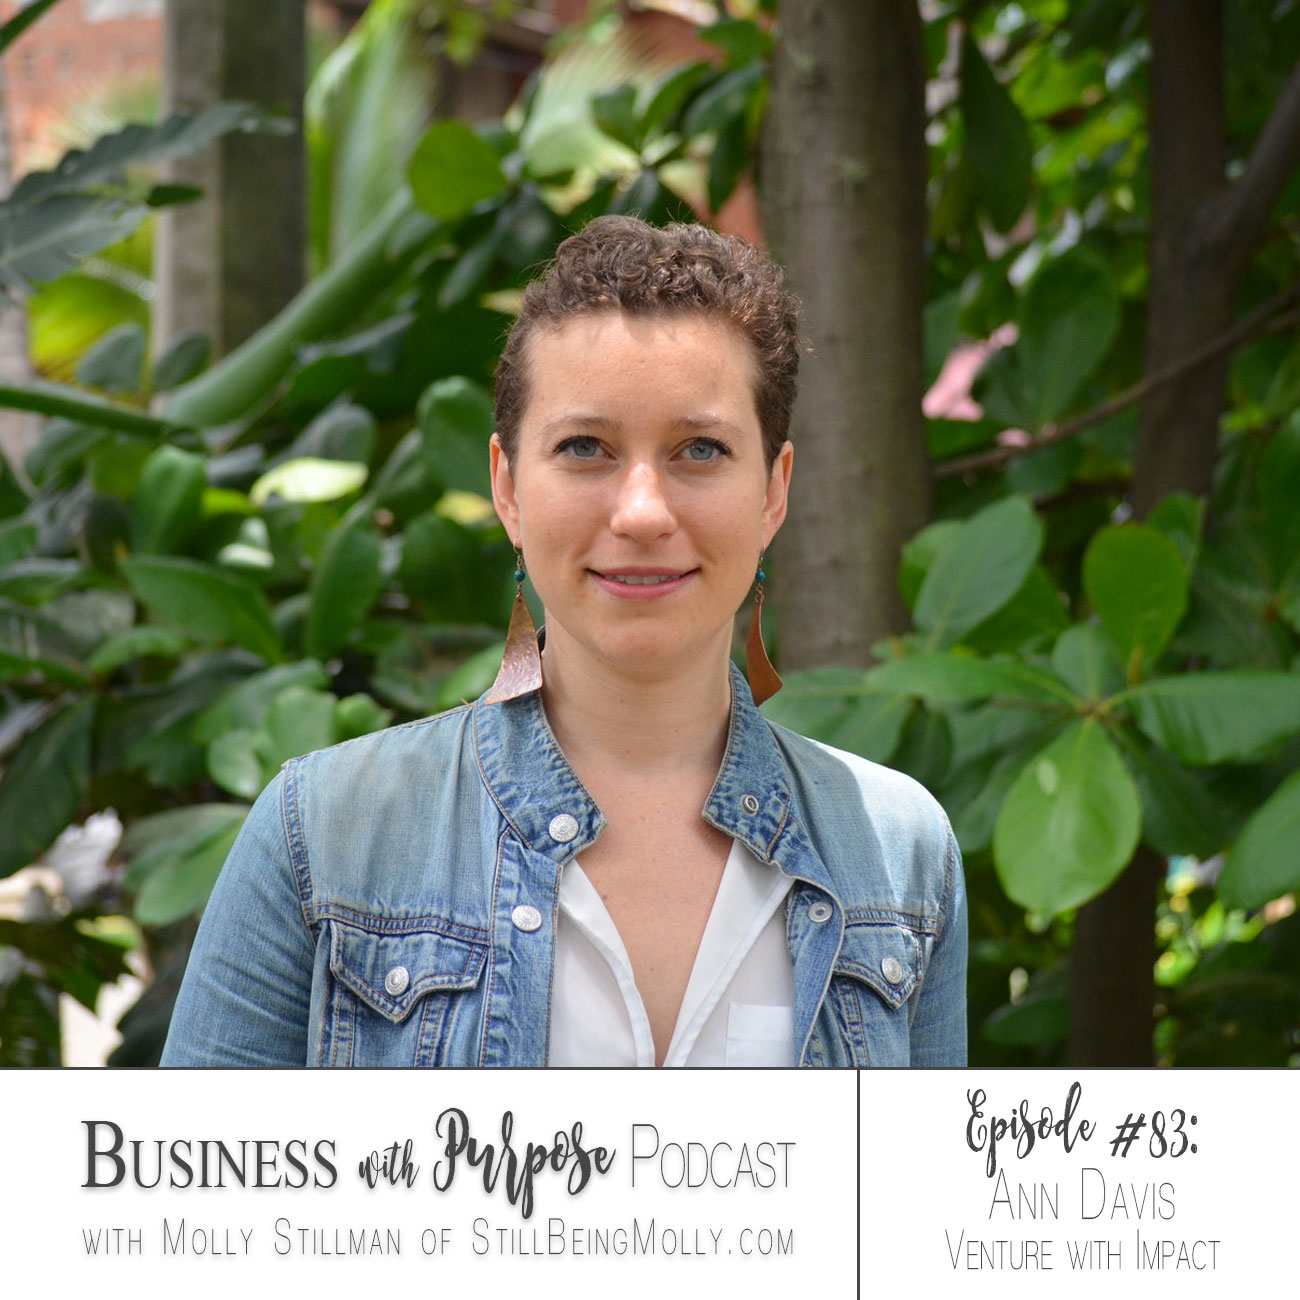 Business with Purpose Podcast EP 83: Ann Davis, Venture with Impact by popular North Carolina ethical blogger and podcaster Still Being Molly